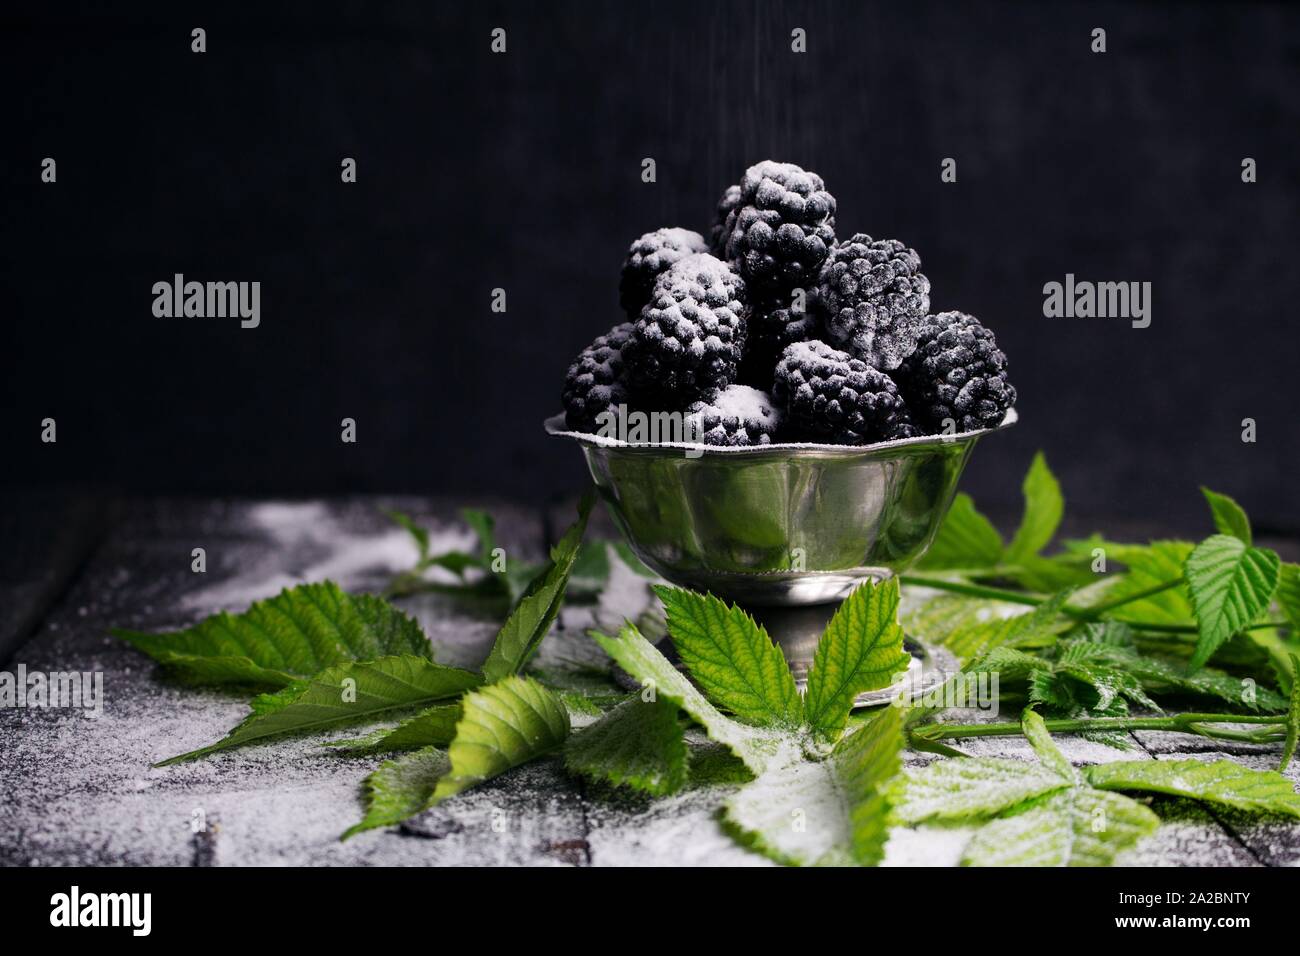 Blackberries Served With Sprinkled Powdered Sugar and Blackberry Leaves On Rustic Wooden Table. Stock Photo